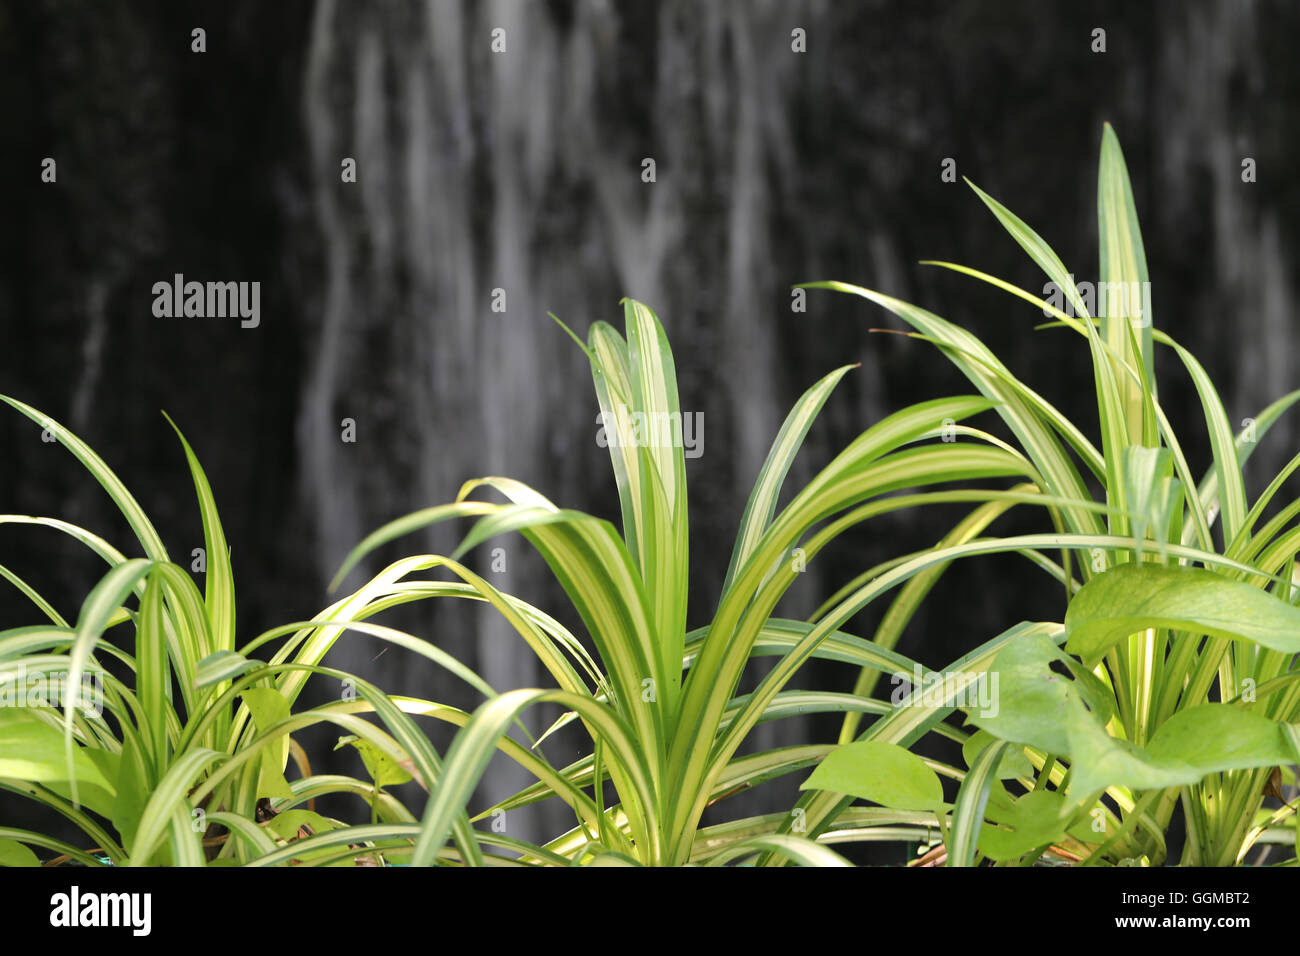 Chlorophytum comosum L, green leaf in the tropics garden of ornamental plants and have Waterfall backdrop. Stock Photo